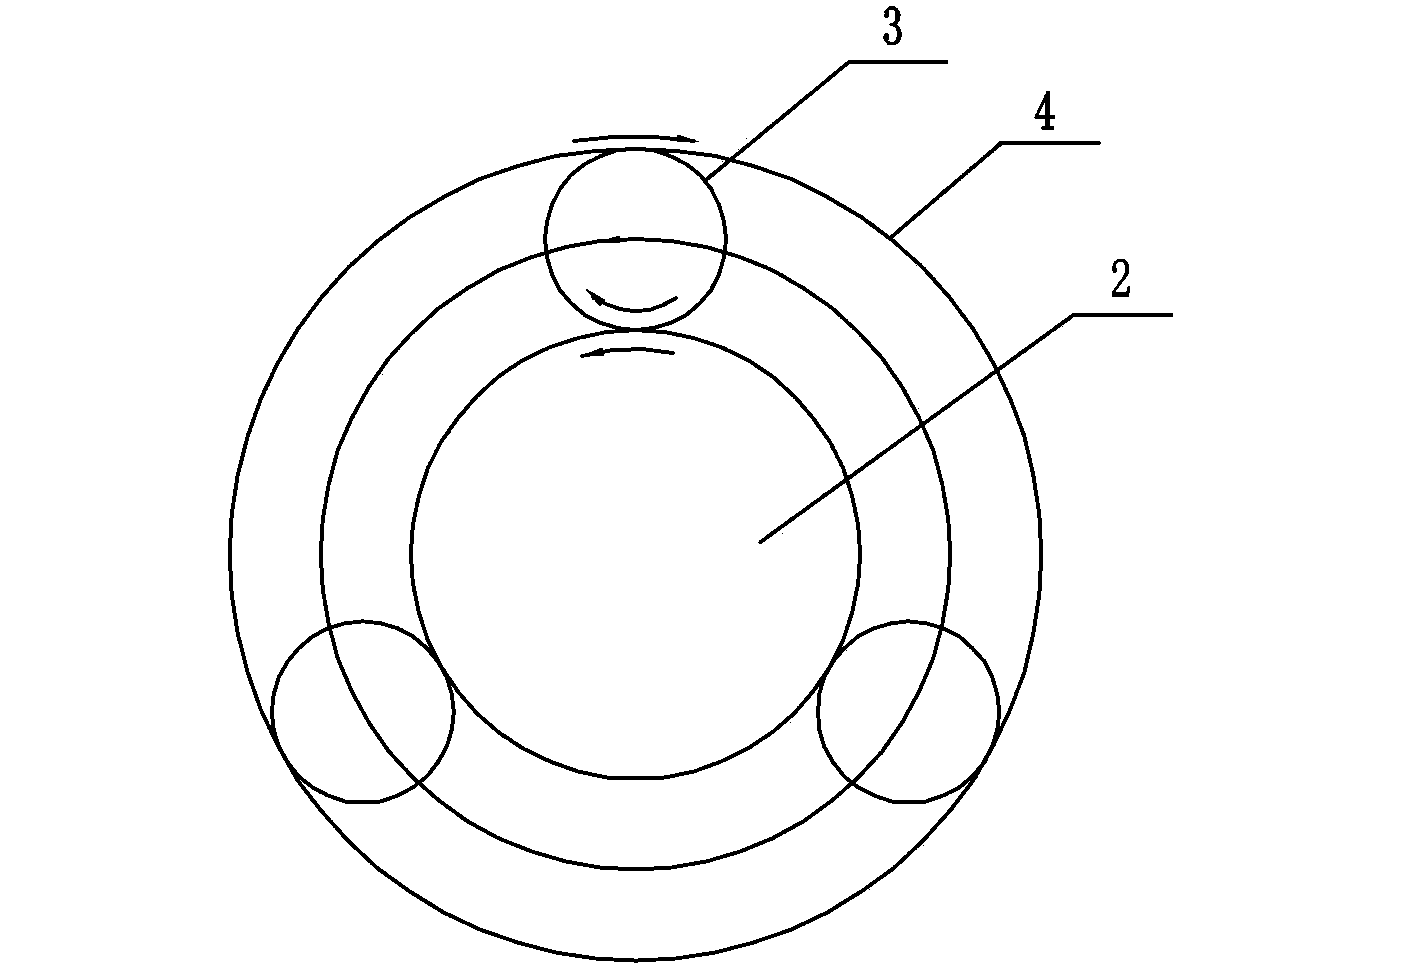 Variable-ratio speed regulation device